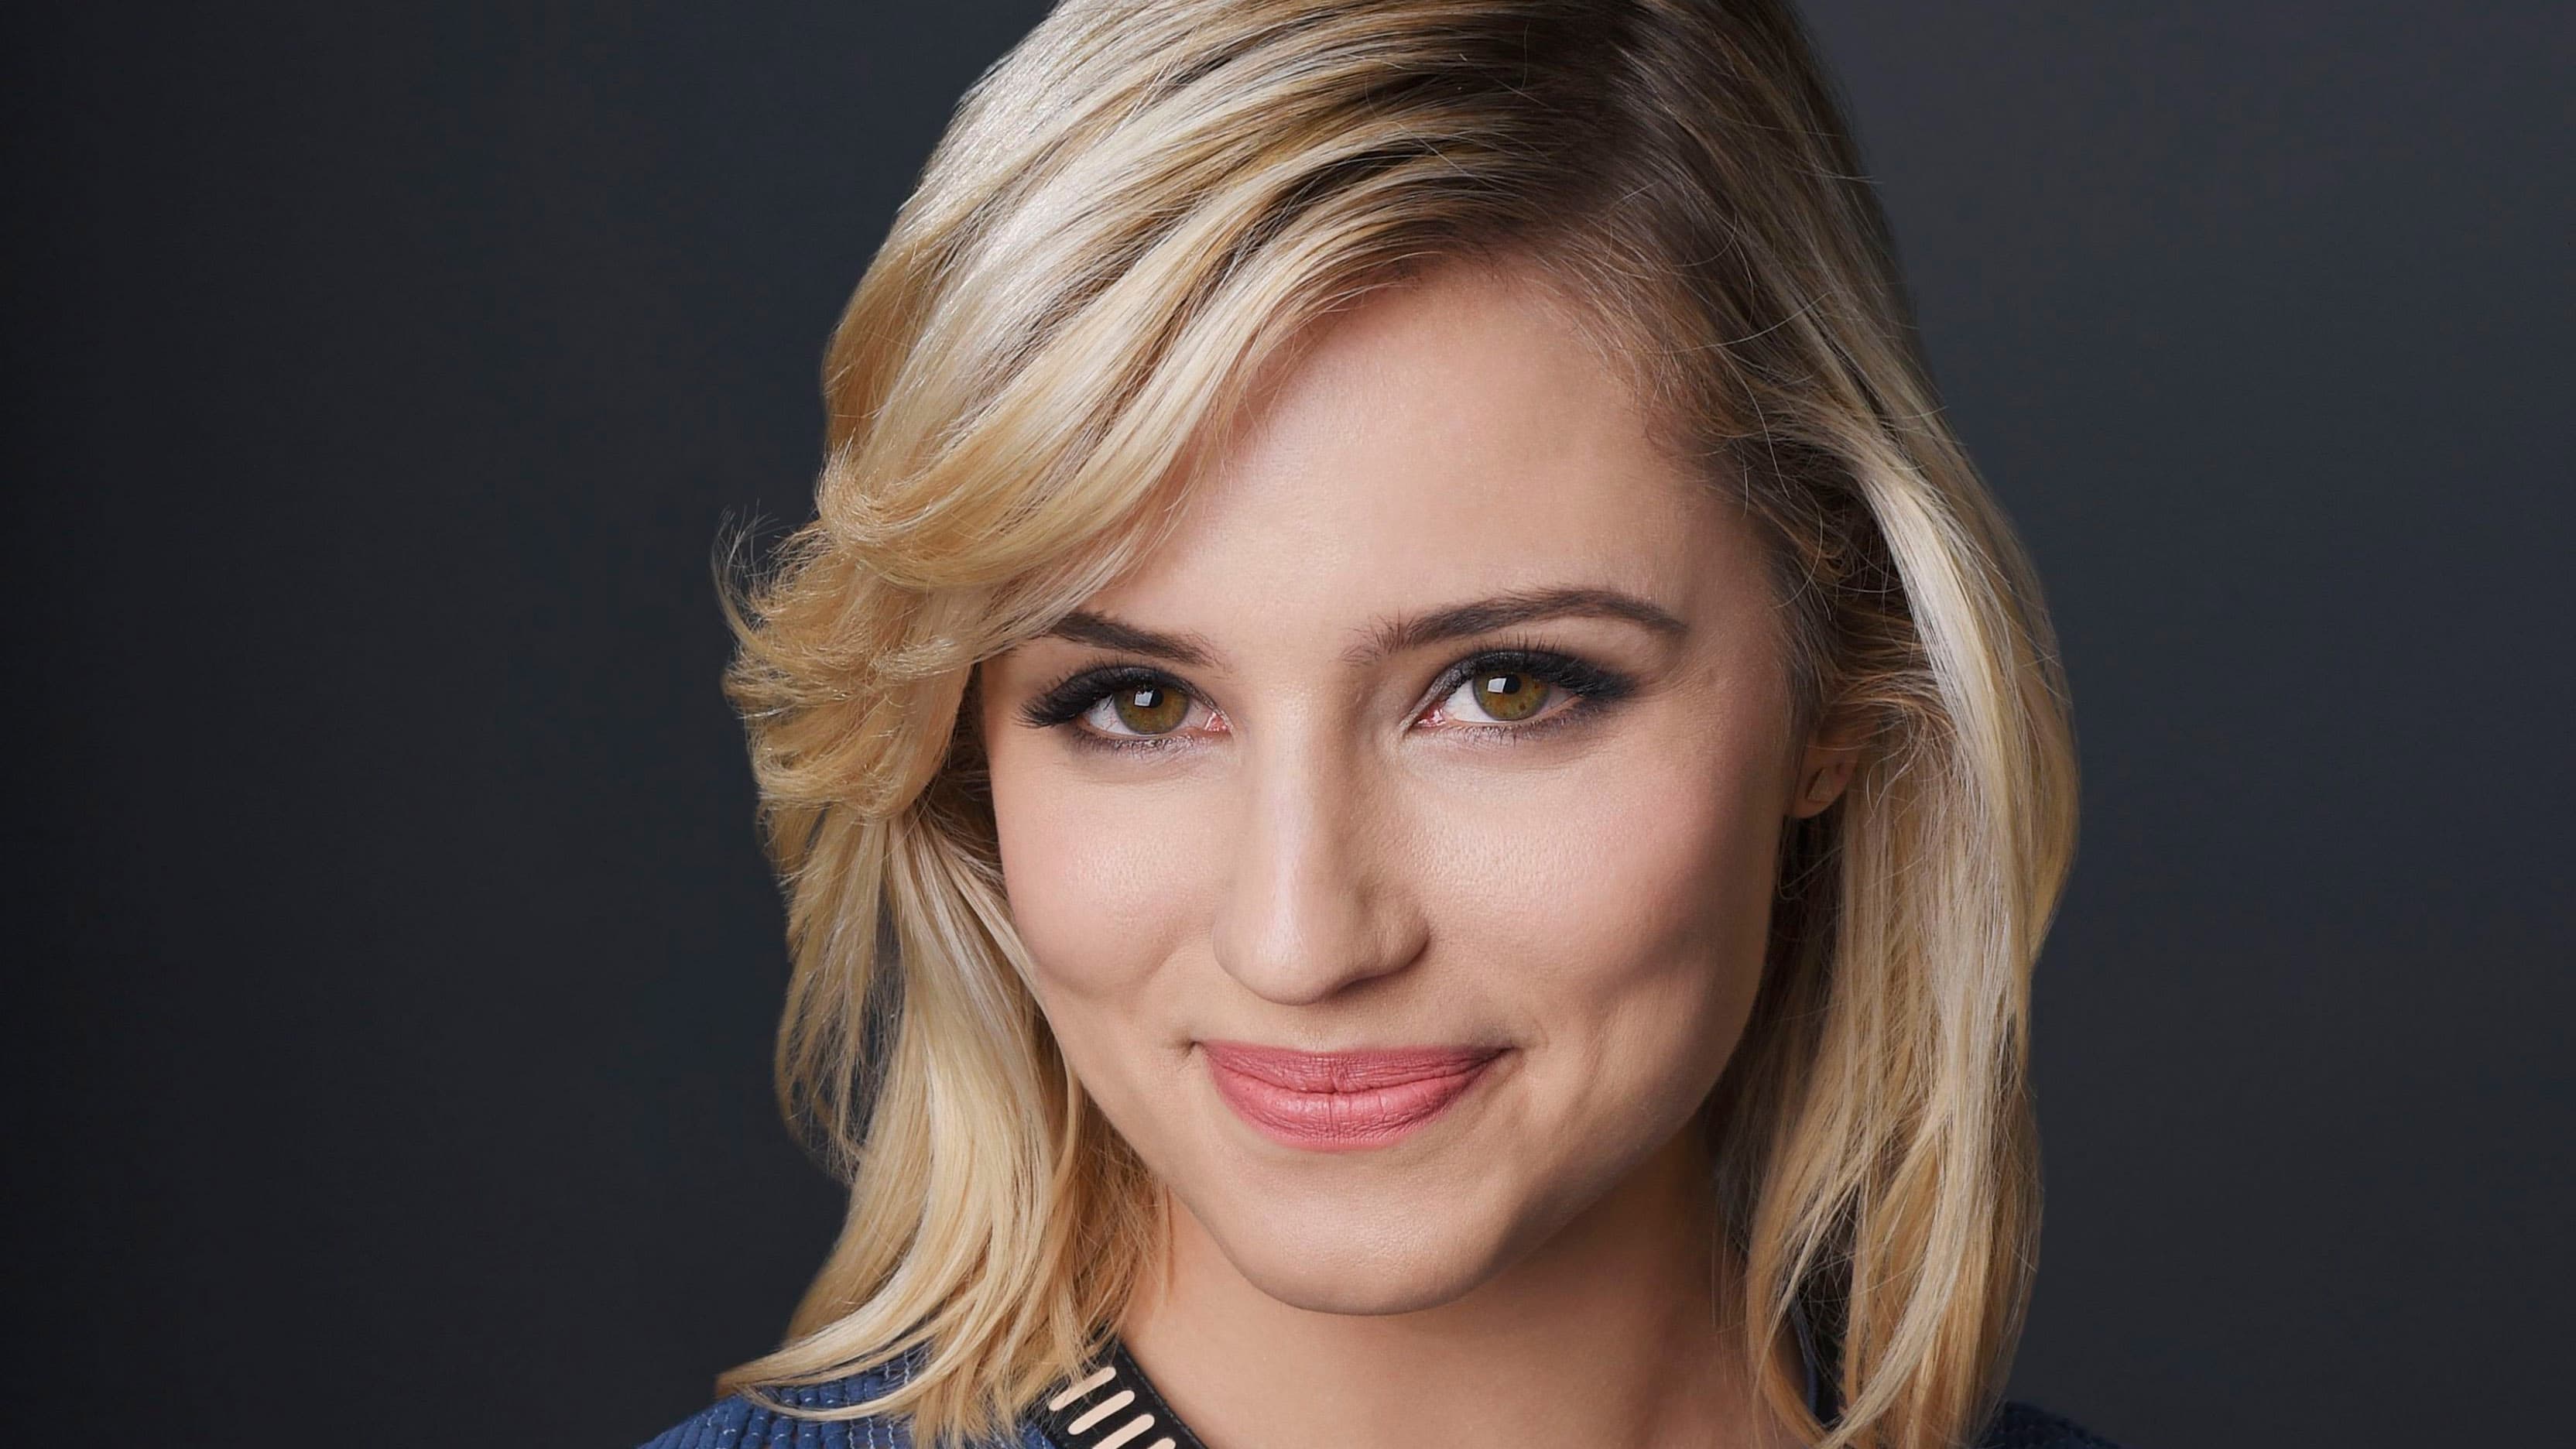 Dianna Agron Actress Blonde American Smile Face 3328x1872